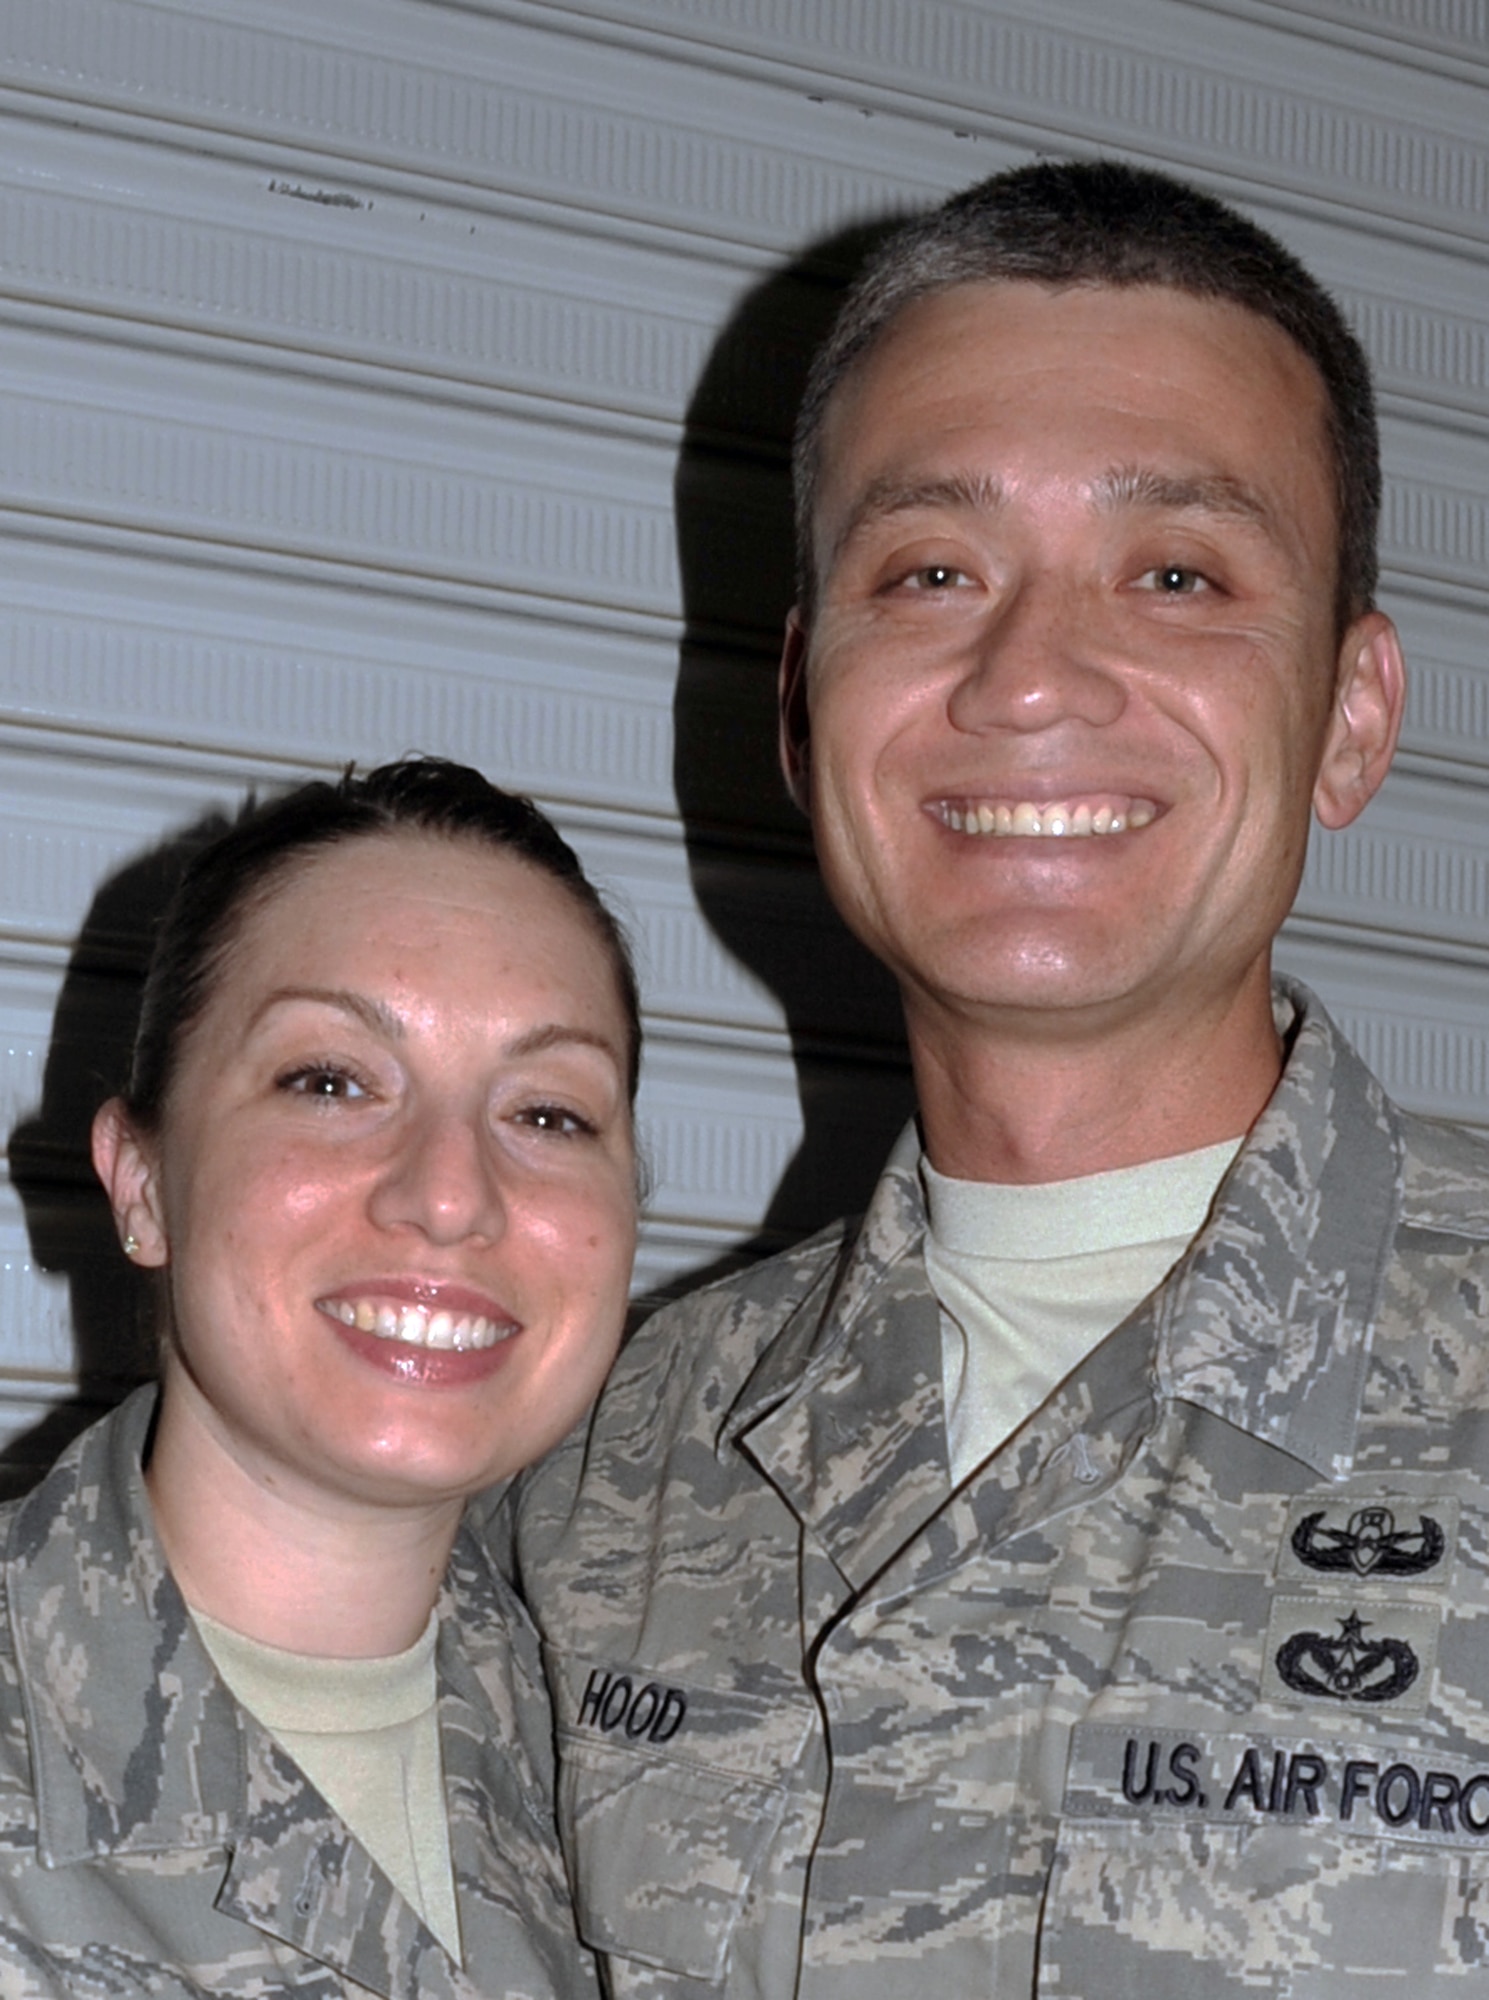 Tech. Sgt. Wendy Hood, a command post craftsman with the 380th Air Expeditionary Wing, stops for a photos with her husband, Tech. Sgt. Robert Hood, an explosive ordnance technician with the 380th Expeditionary Civil Engineer Squadron, at a non-disclosed base in Southwest Asia on April 21, 2010. They are both deployed together for the first time and celebrated their 10th wedding anniversary on April 22. Both of the Sergeants Hood are deployed from Hill Air Force Base, Utah. Sergeant Robert Hood is from the 775th Civil Engineer Squadron and his hometown is Killeen, Texas. Sergeant Wendy Hood is from the 75th Air Base Wing Command Post and her hometown is Hooksett, N.H. (U.S. Air Force Photo/Master Sgt. Scott T. Sturkol/Released)
